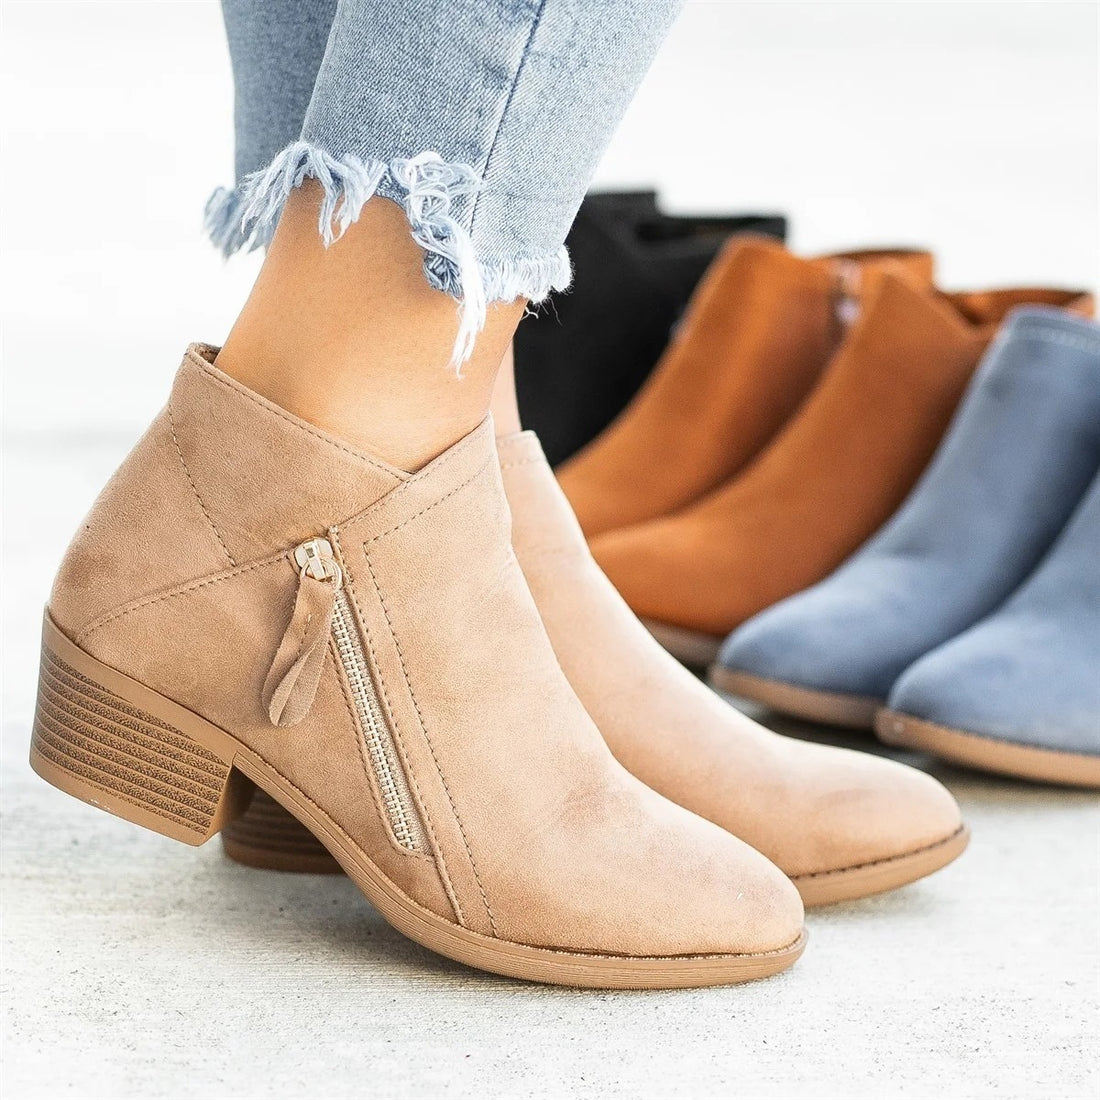 Go West, Suede Style Ankle Boots For Women, Low Heel with Side Zipper